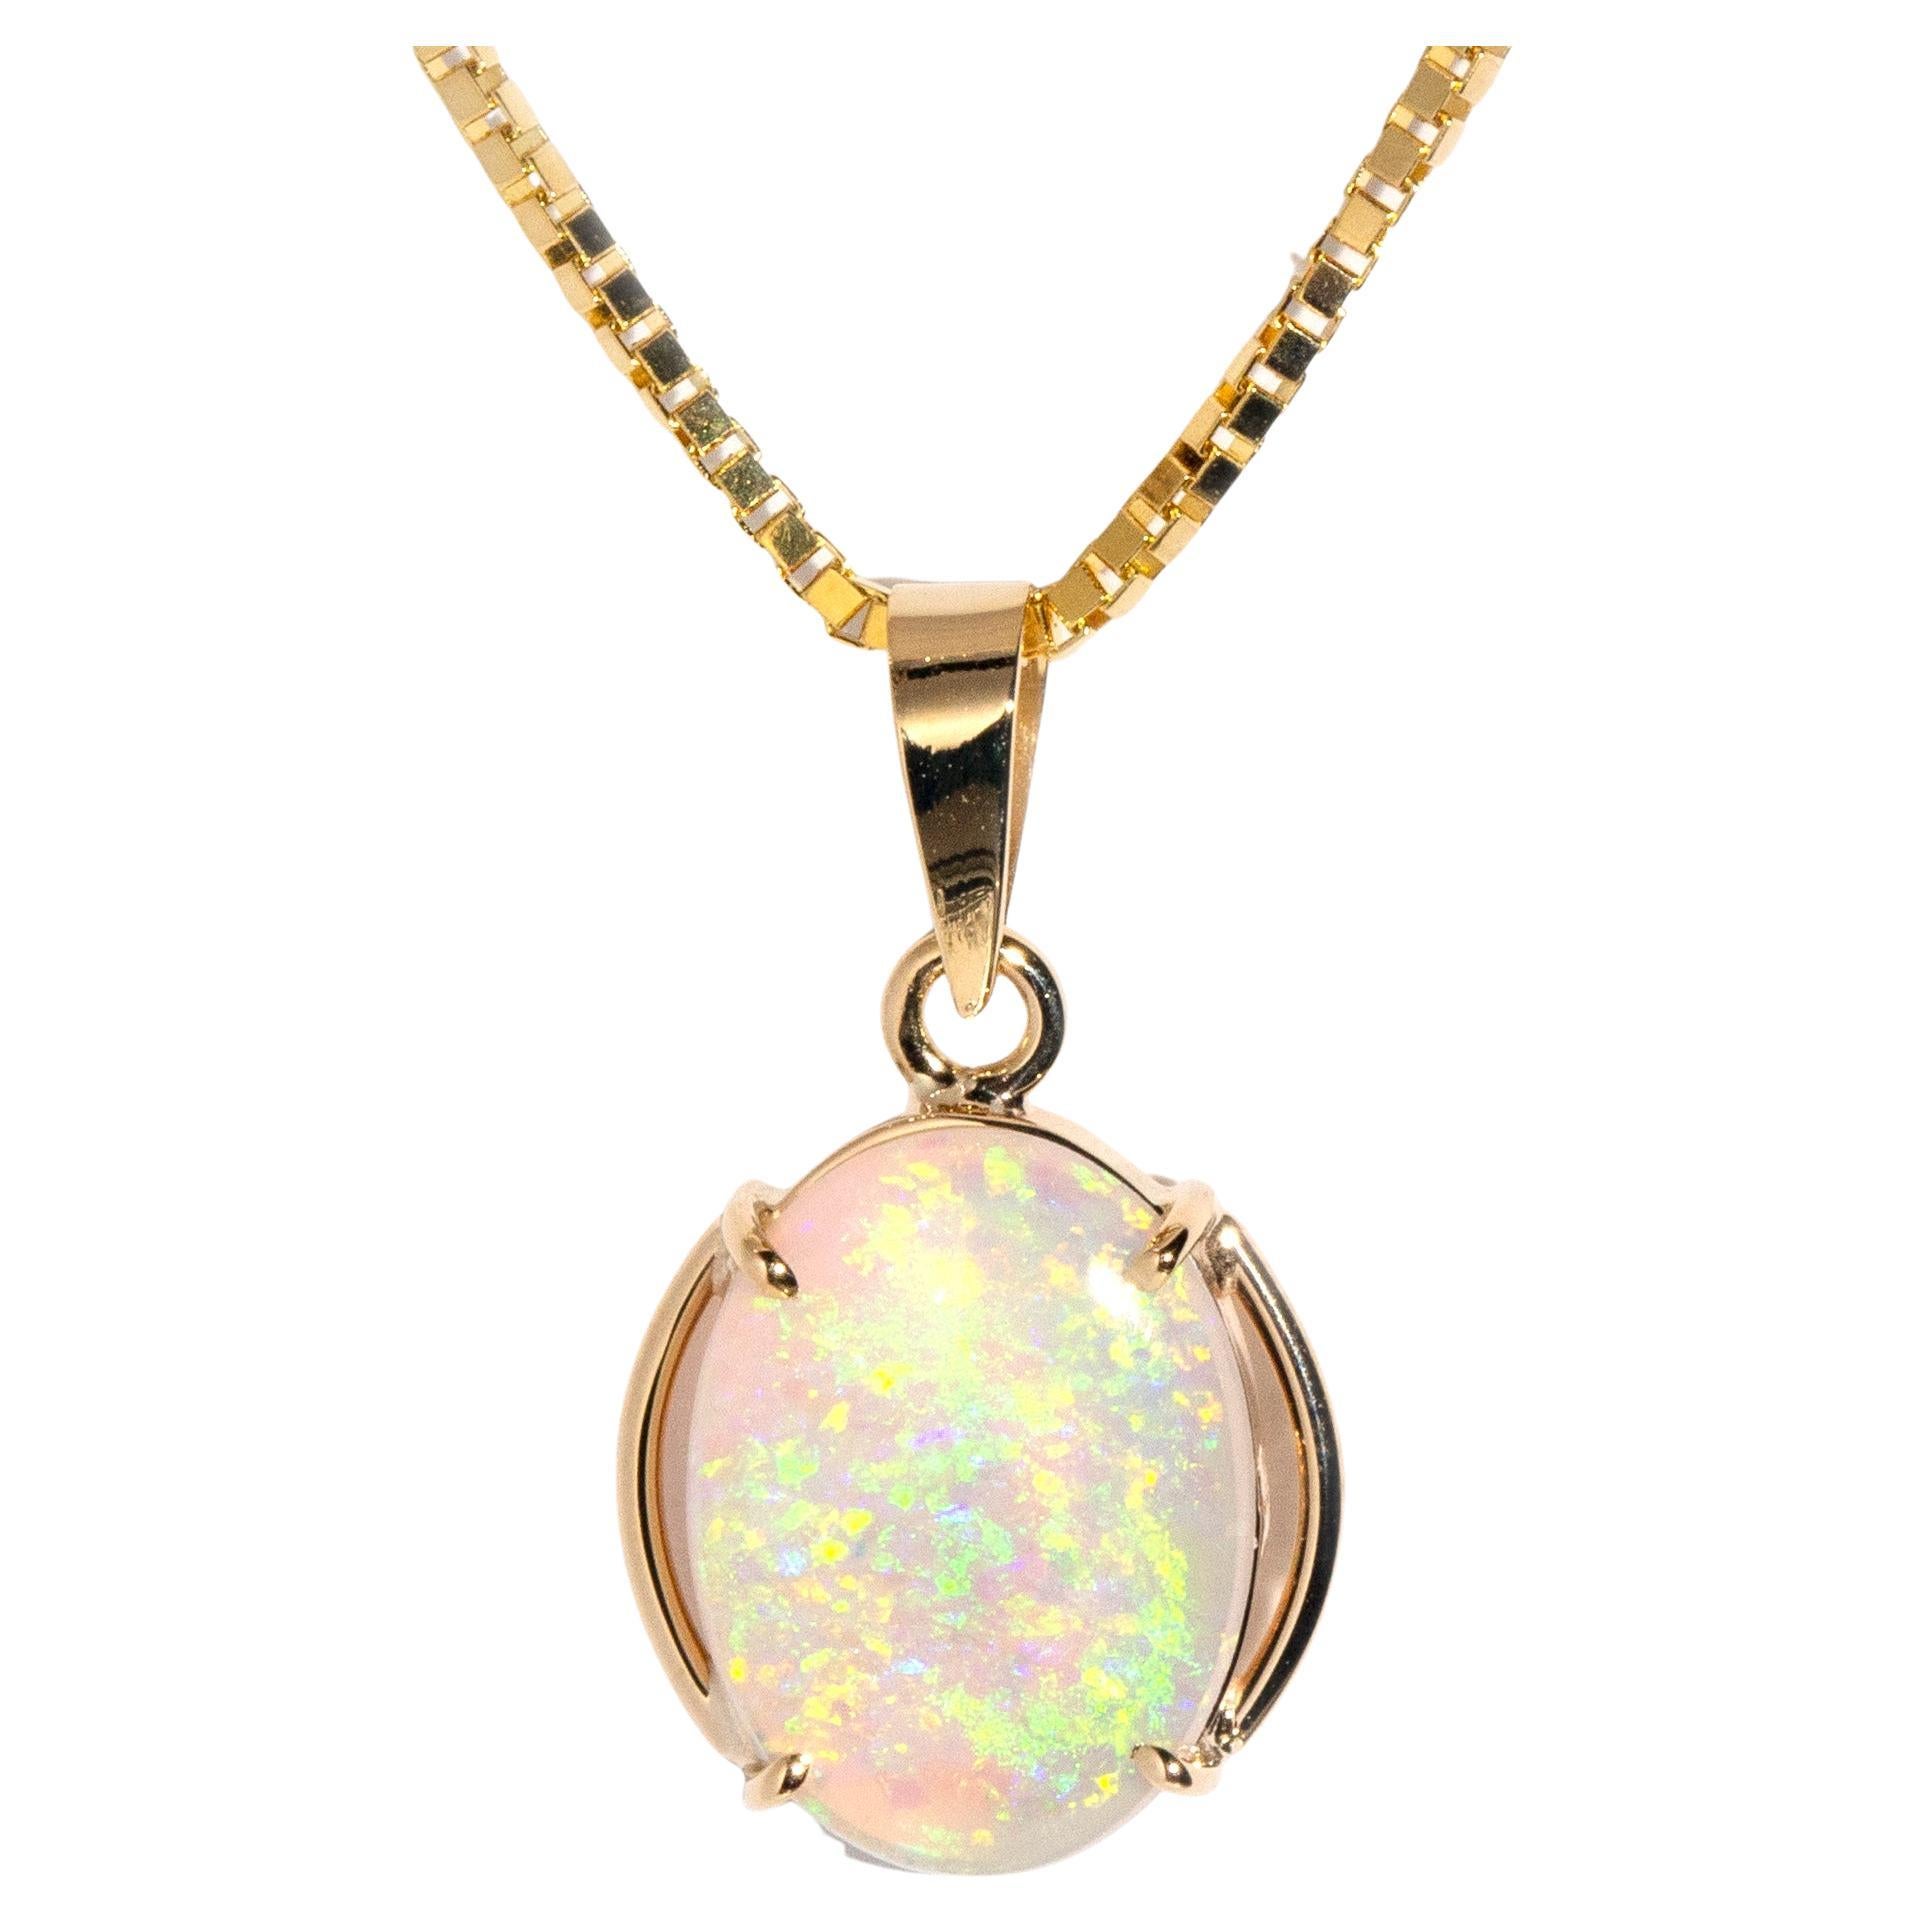 Vintage circa 1980s 14 Carat Yellow Gold Oval Crystal Opal Pendant & Fine Chain